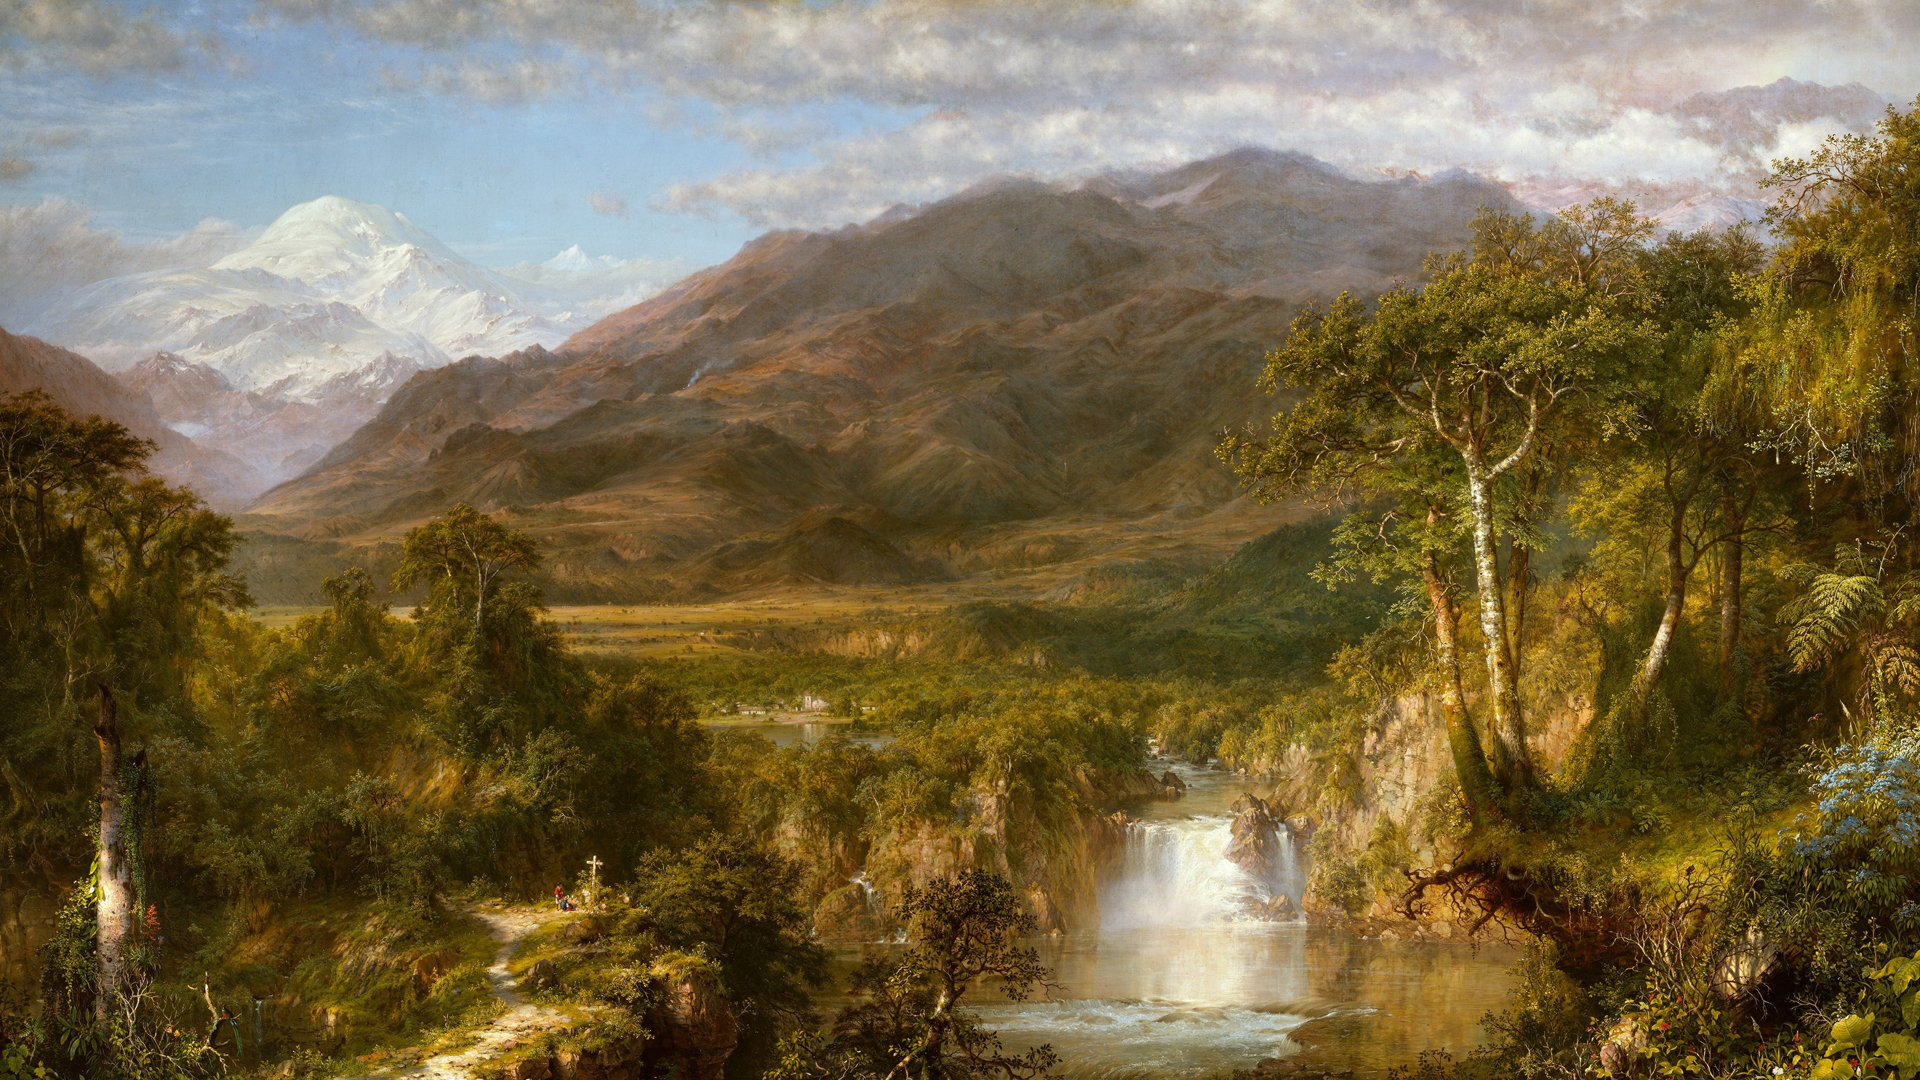 Weekly Wallpaper: Enjoy Some Fine Art From The Met